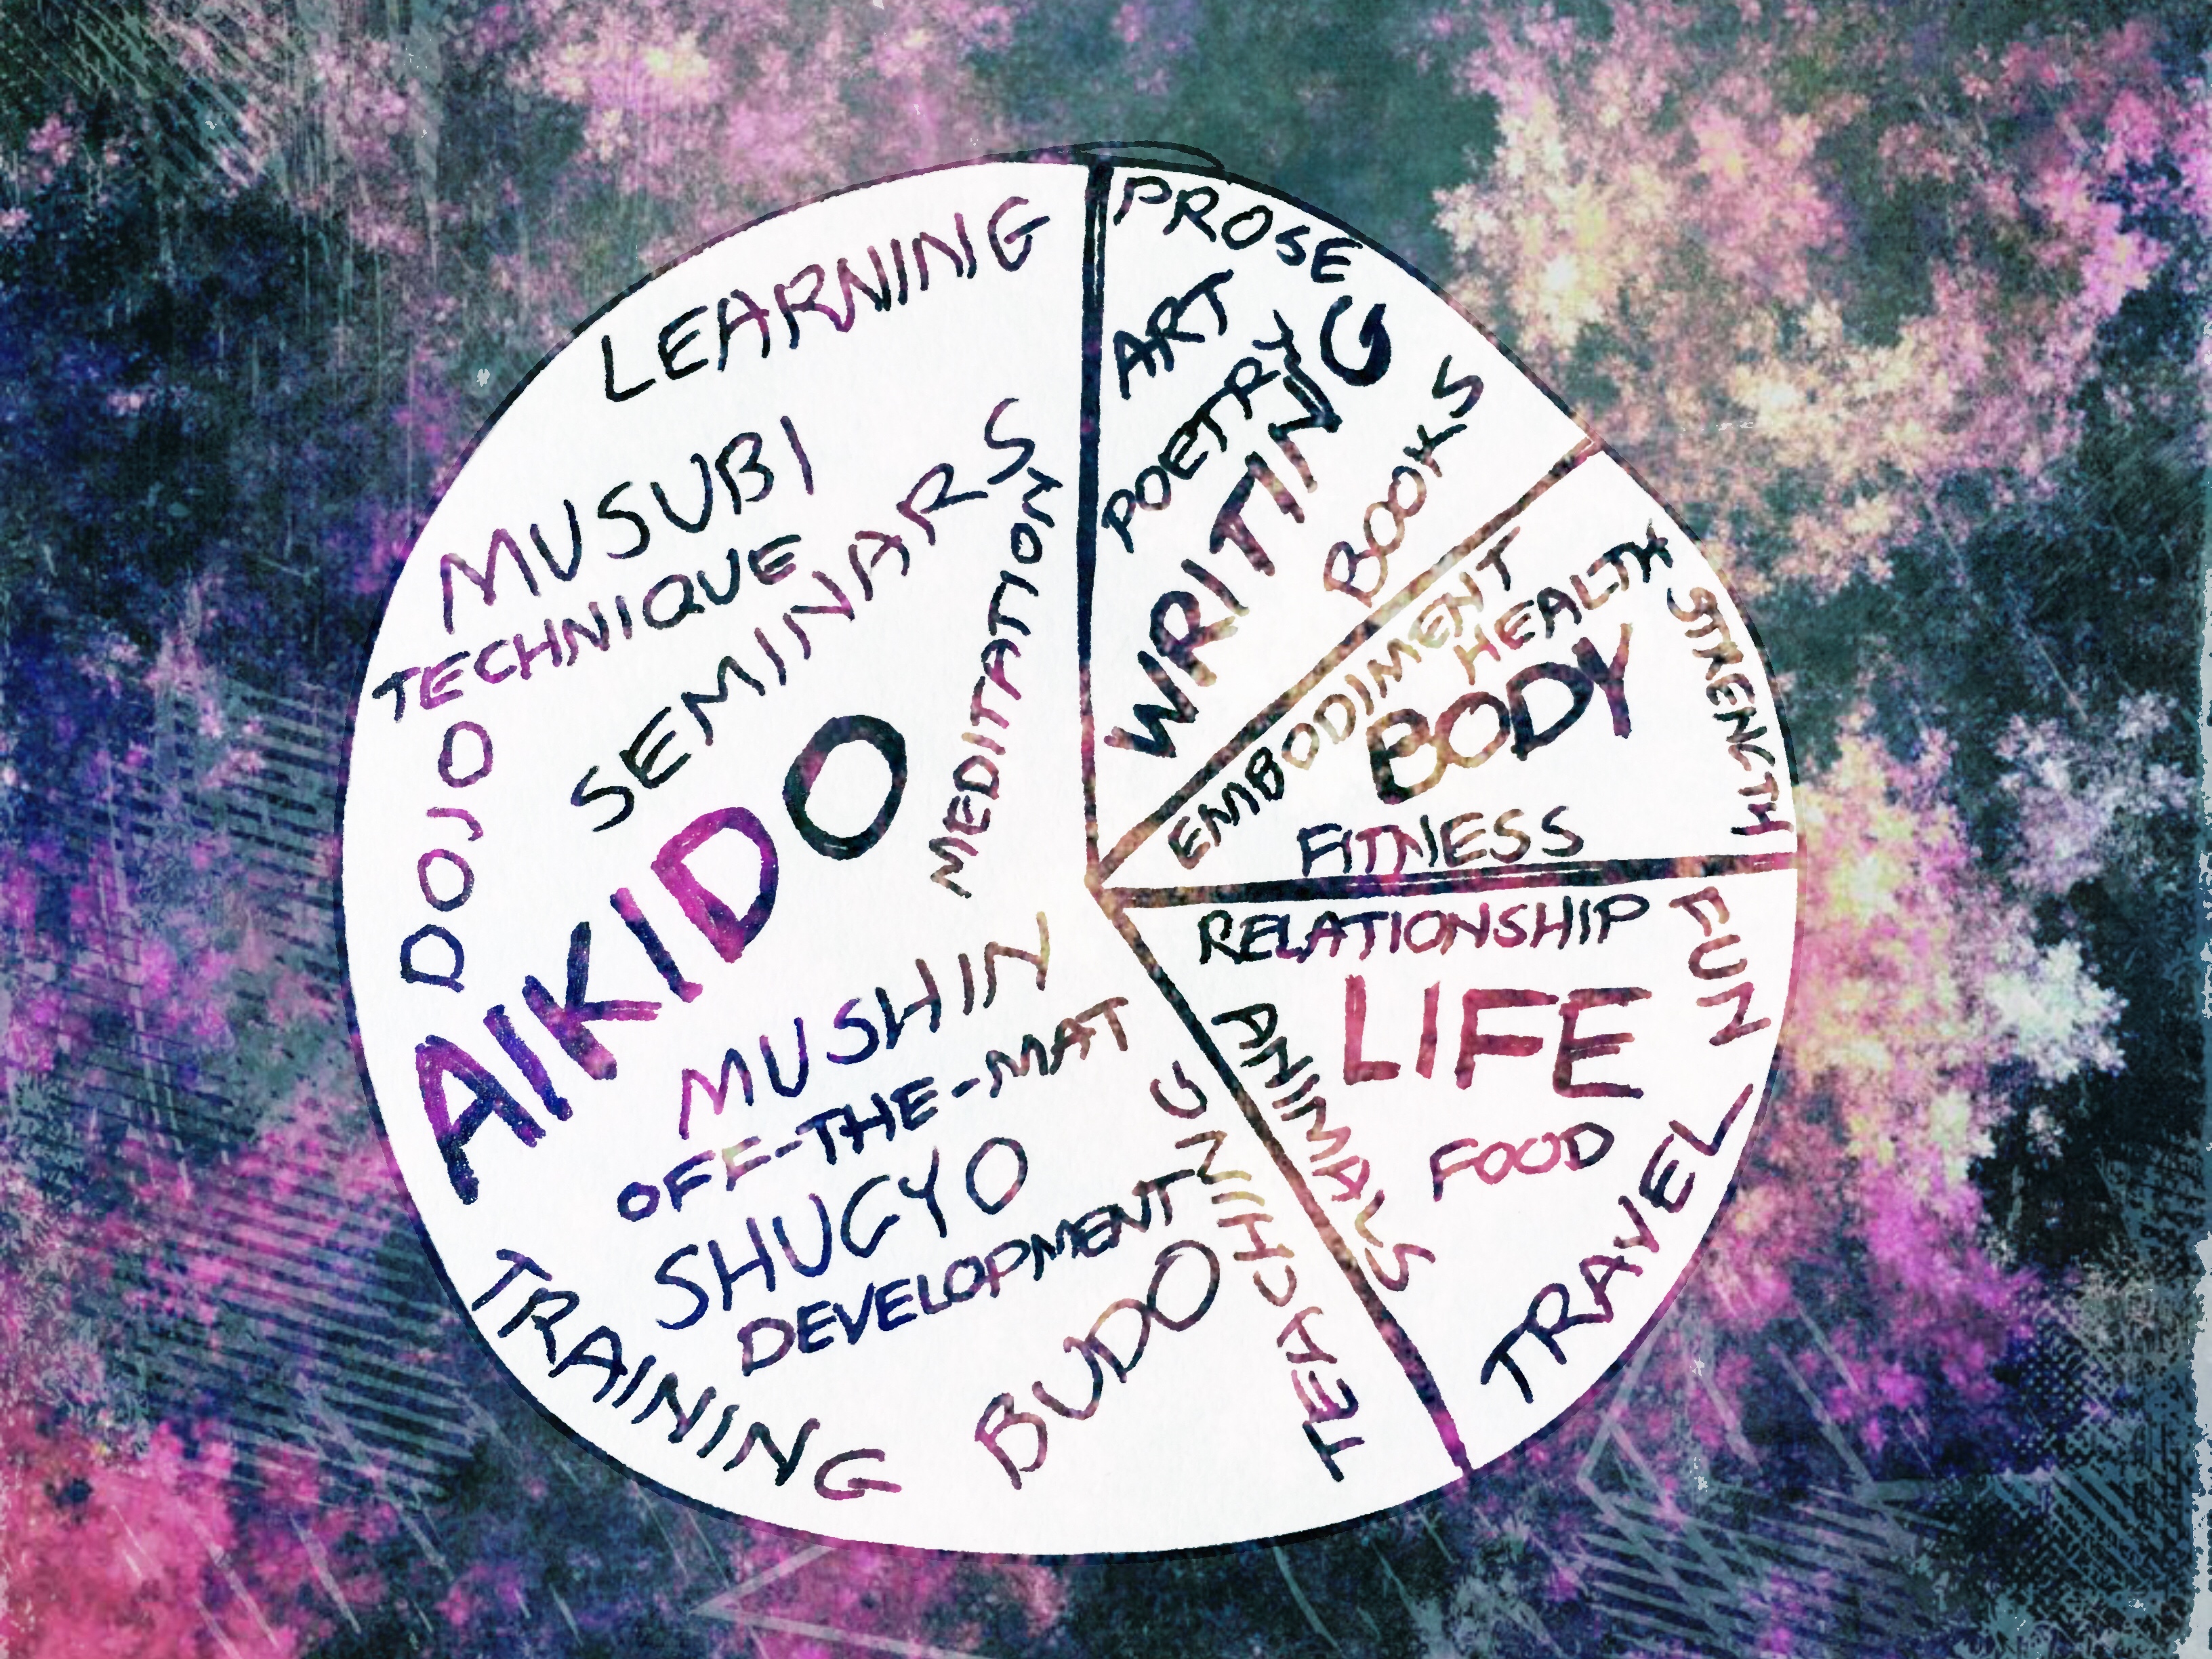 Blog Topic Pie Chart - Aikido, Writing, Body, and Life